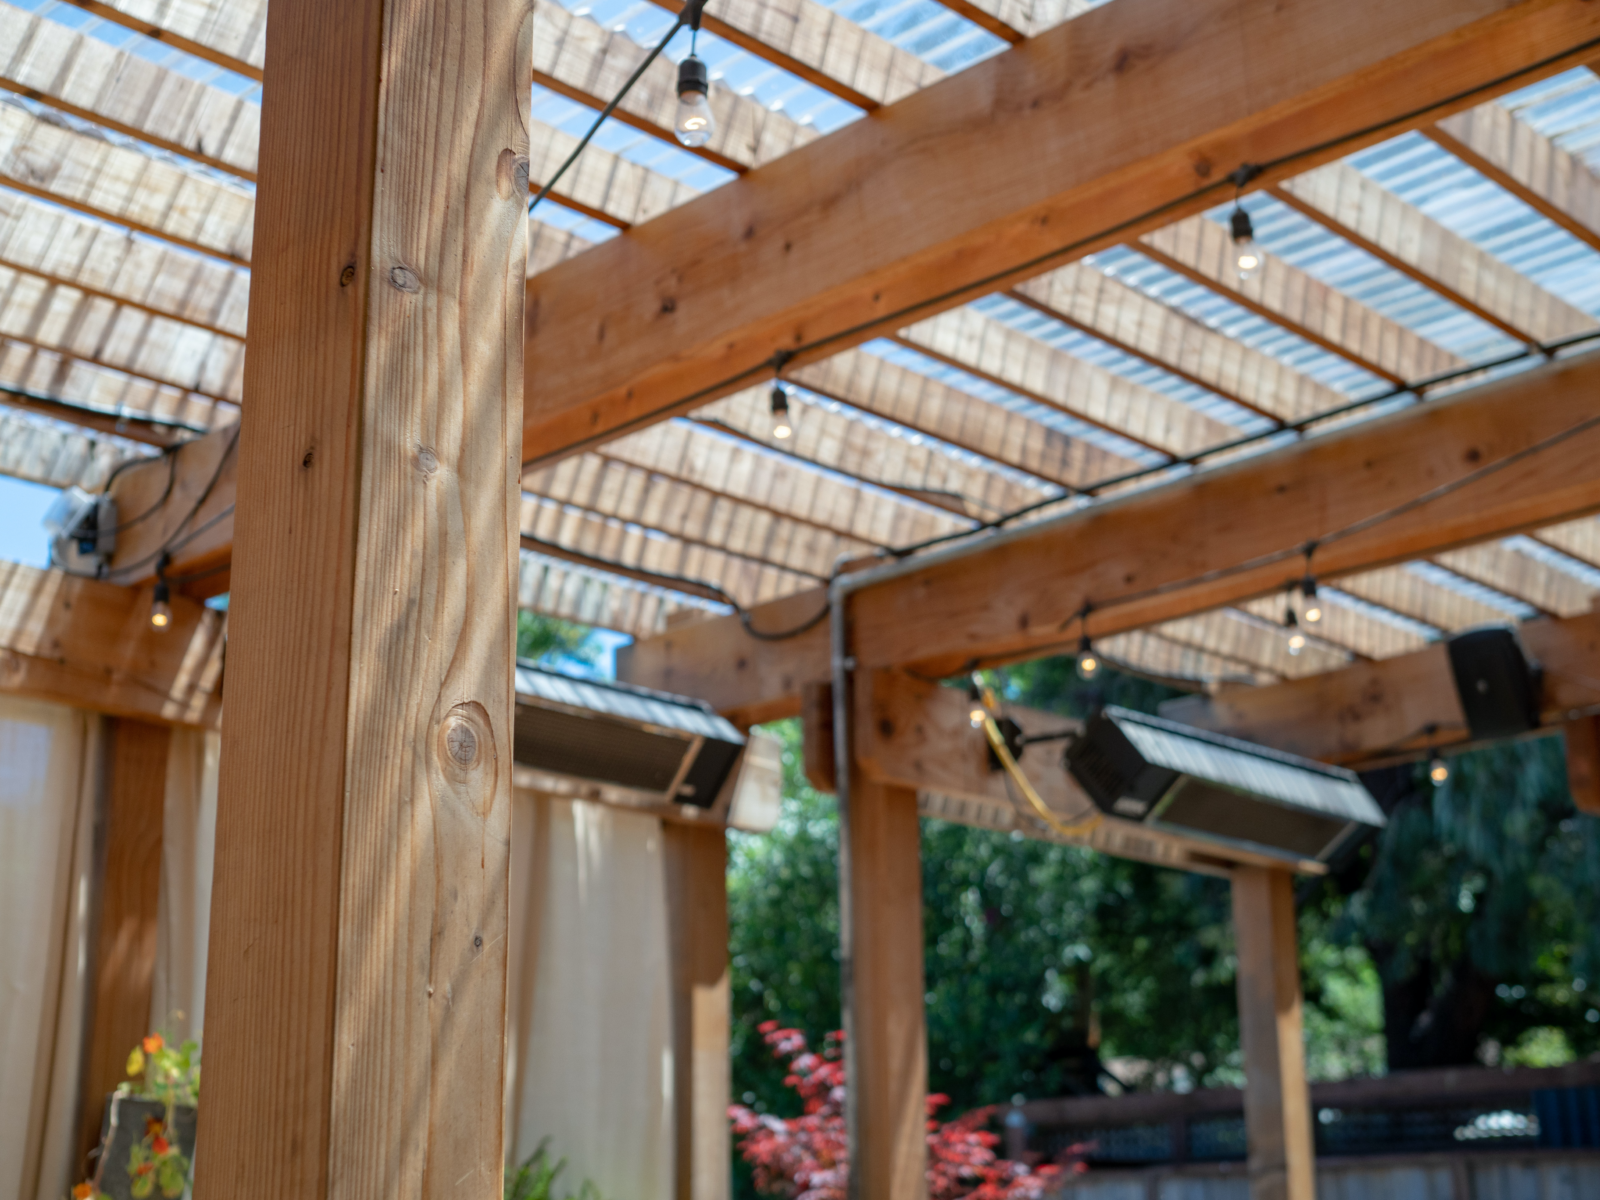 Outdoor sound systems for your backyard and patio